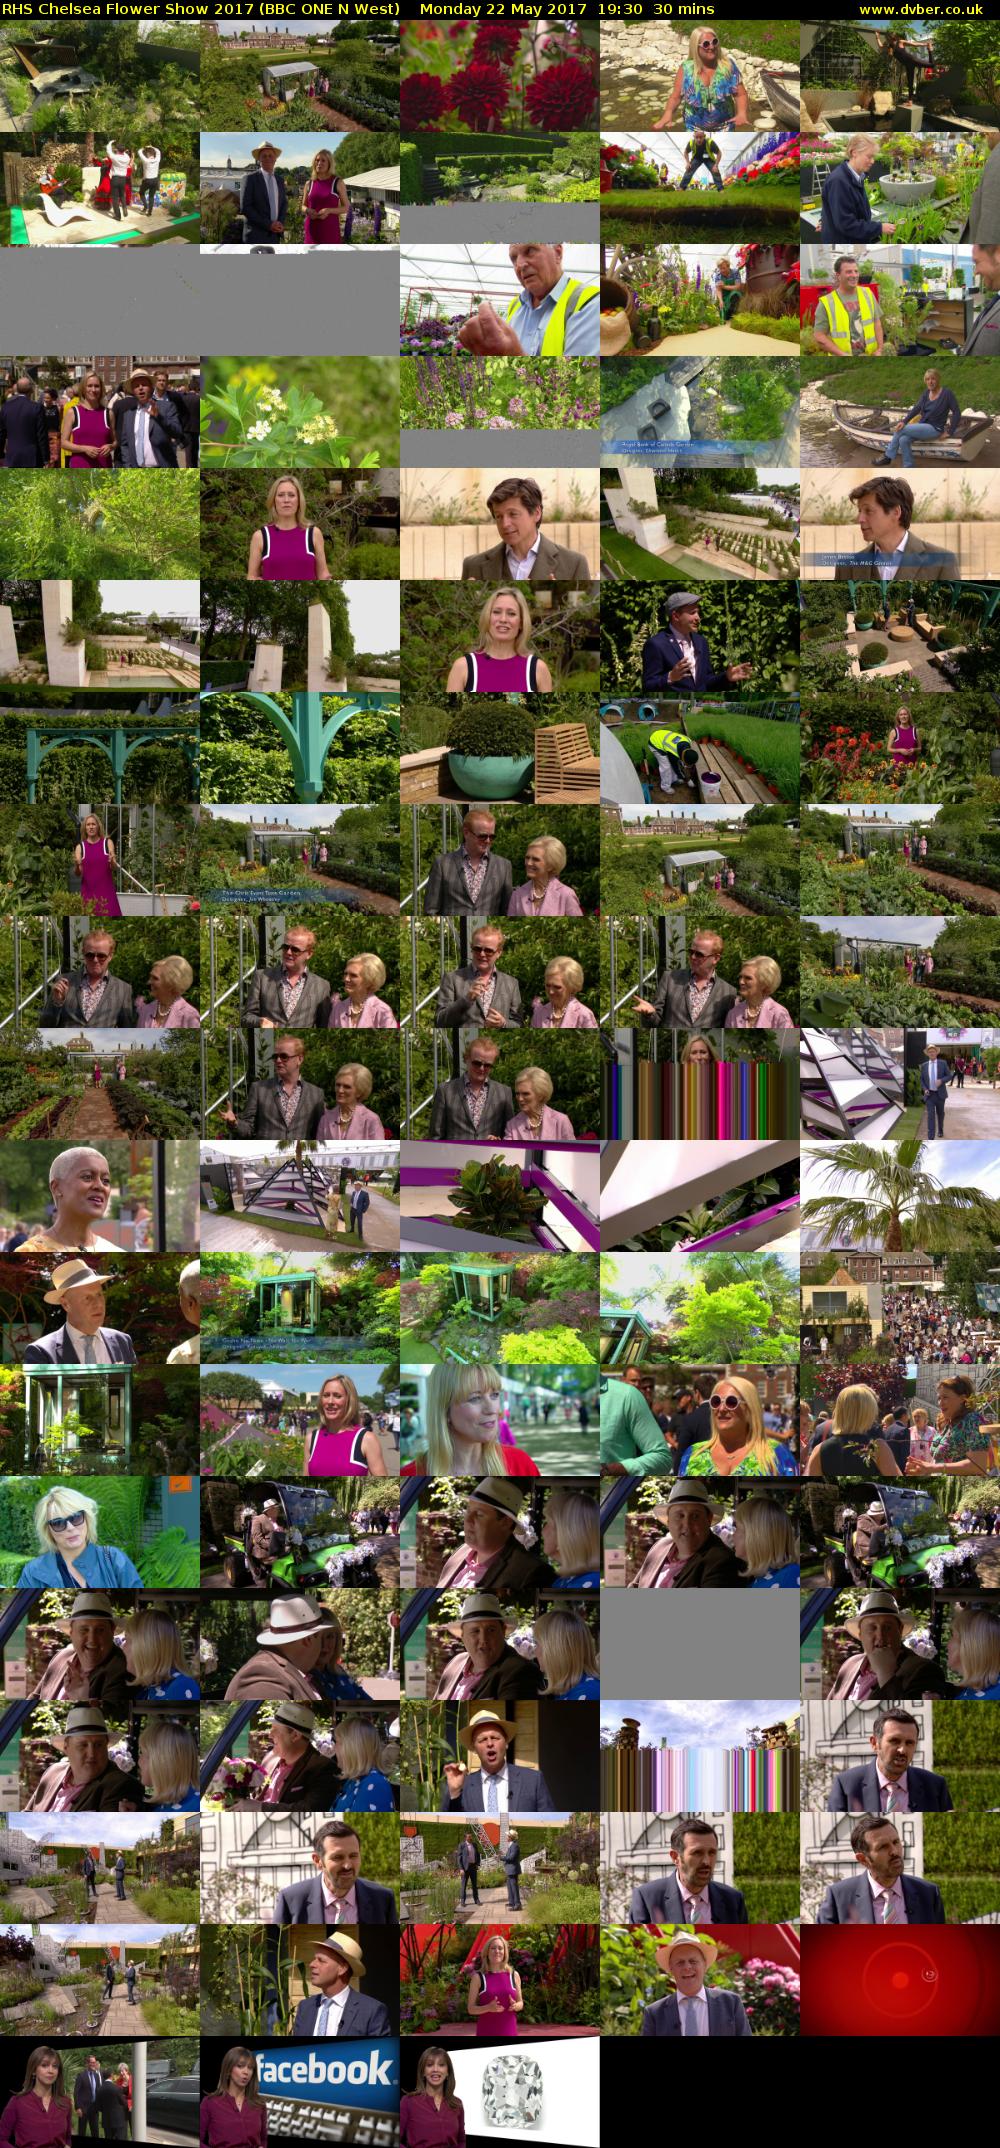 RHS Chelsea Flower Show 2017 (BBC ONE N West) Monday 22 May 2017 19:30 - 20:00